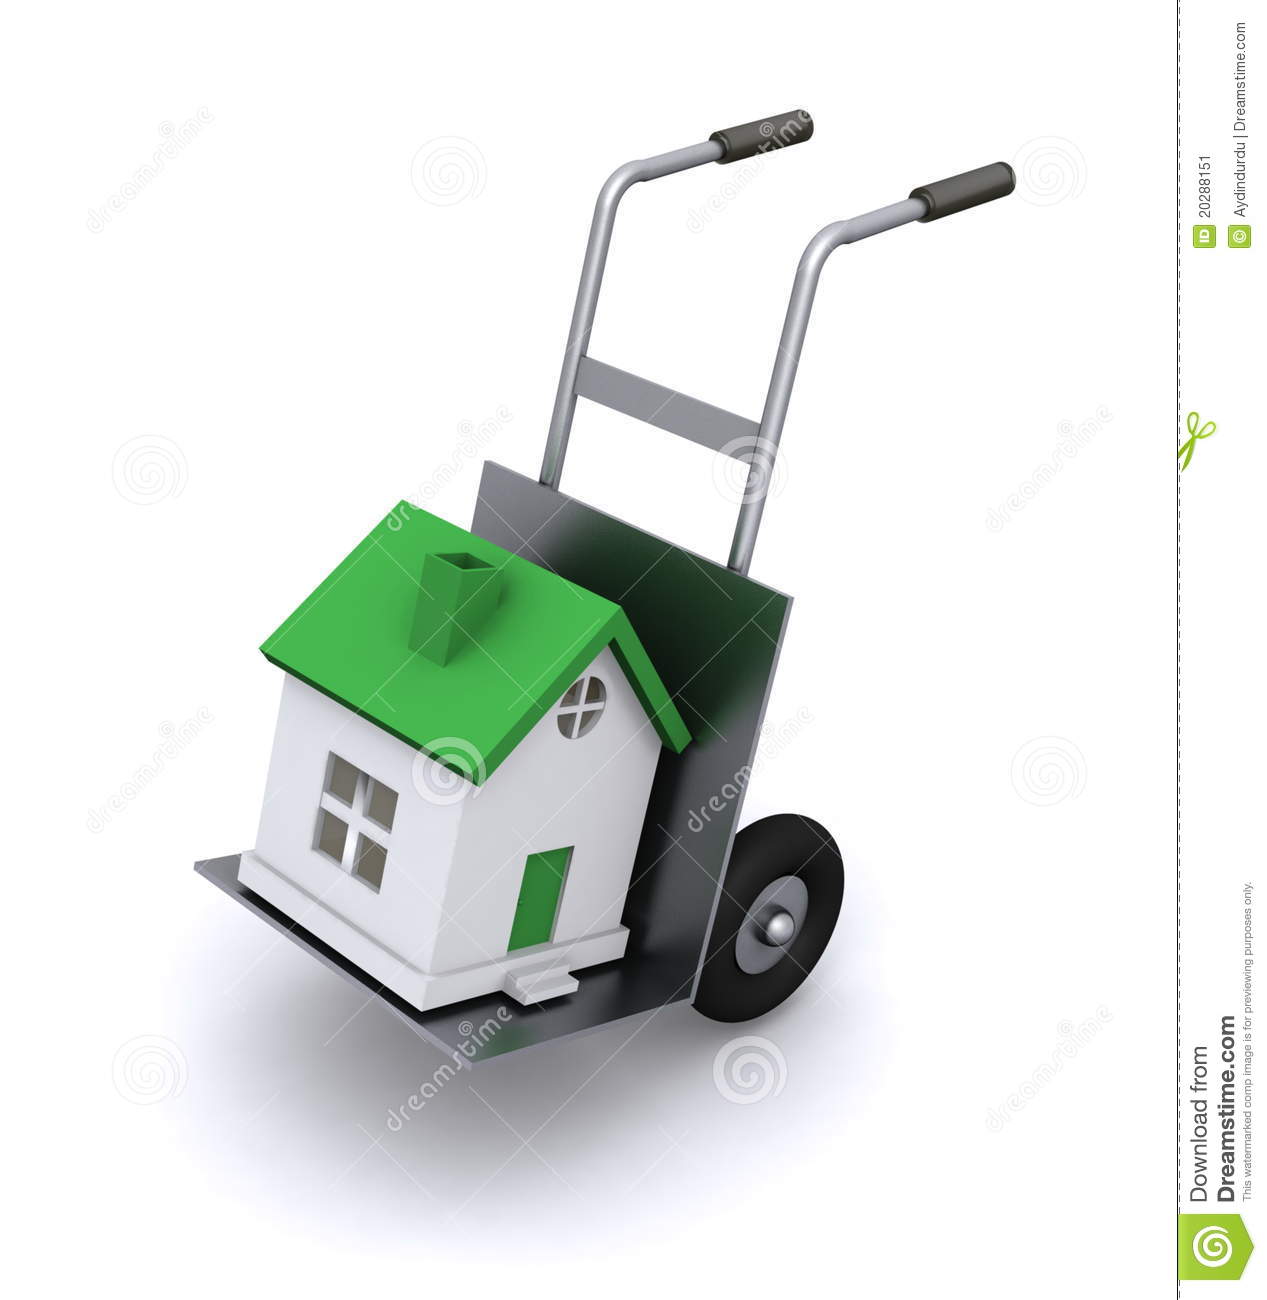 Moving Houses Stock Image   Image  20288151